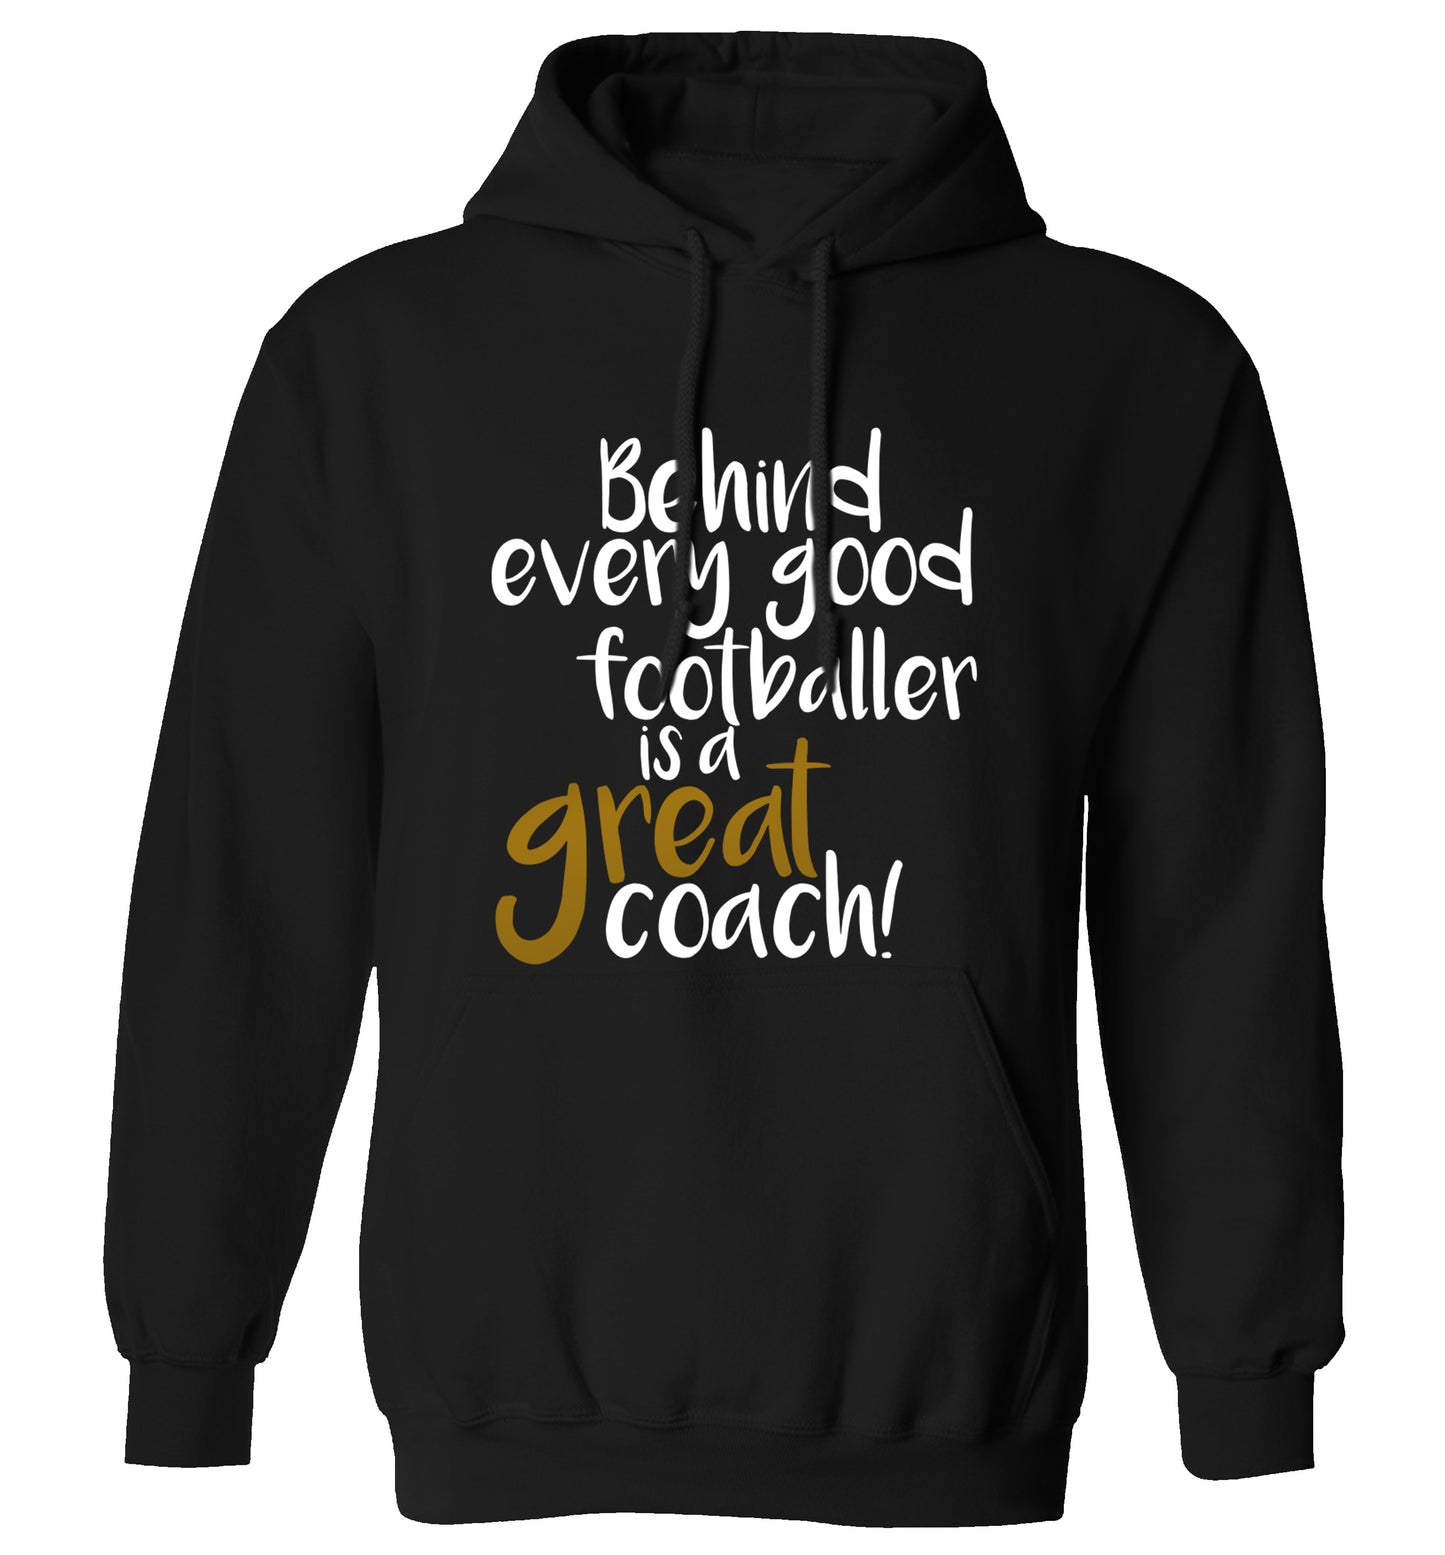 Behind every good footballer is a great coach! adults unisexblack hoodie 2XL